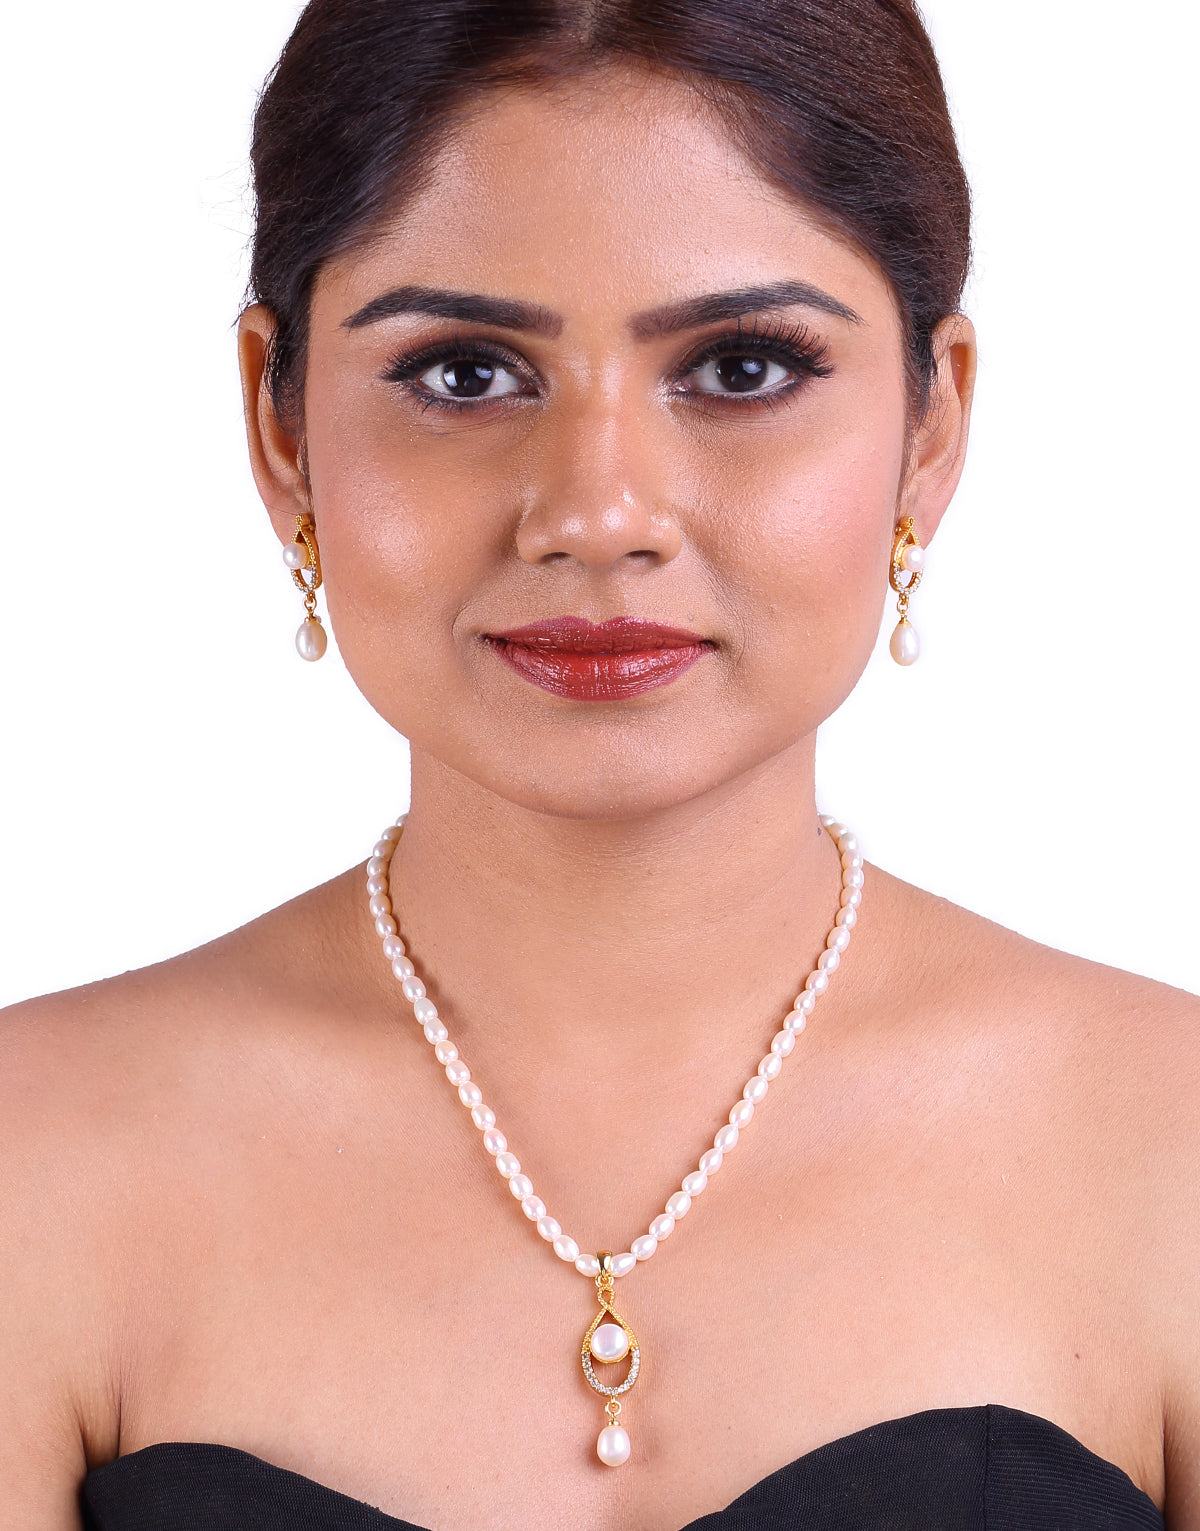 Freshwater Pearl Beaded Necklace With Depicted Design Set In Cubic Zirconia Stones